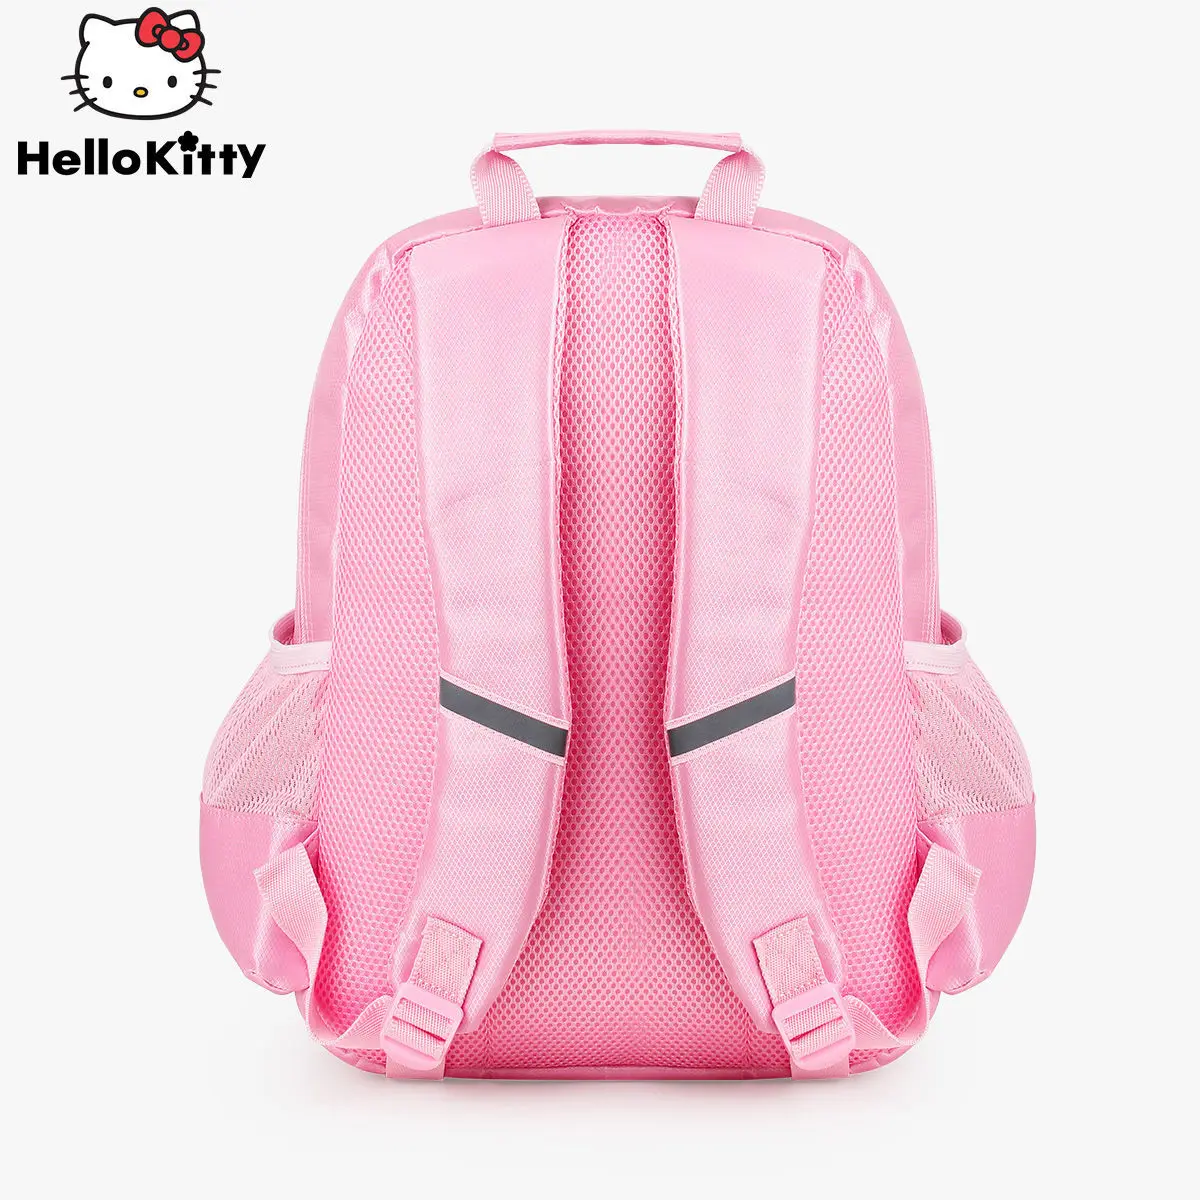 Hello Kitty Fashion New 2021 Cute Cartoon Ridge Embossed Backpack Simple and Comfortable Breathable Children's School Bag enlarge